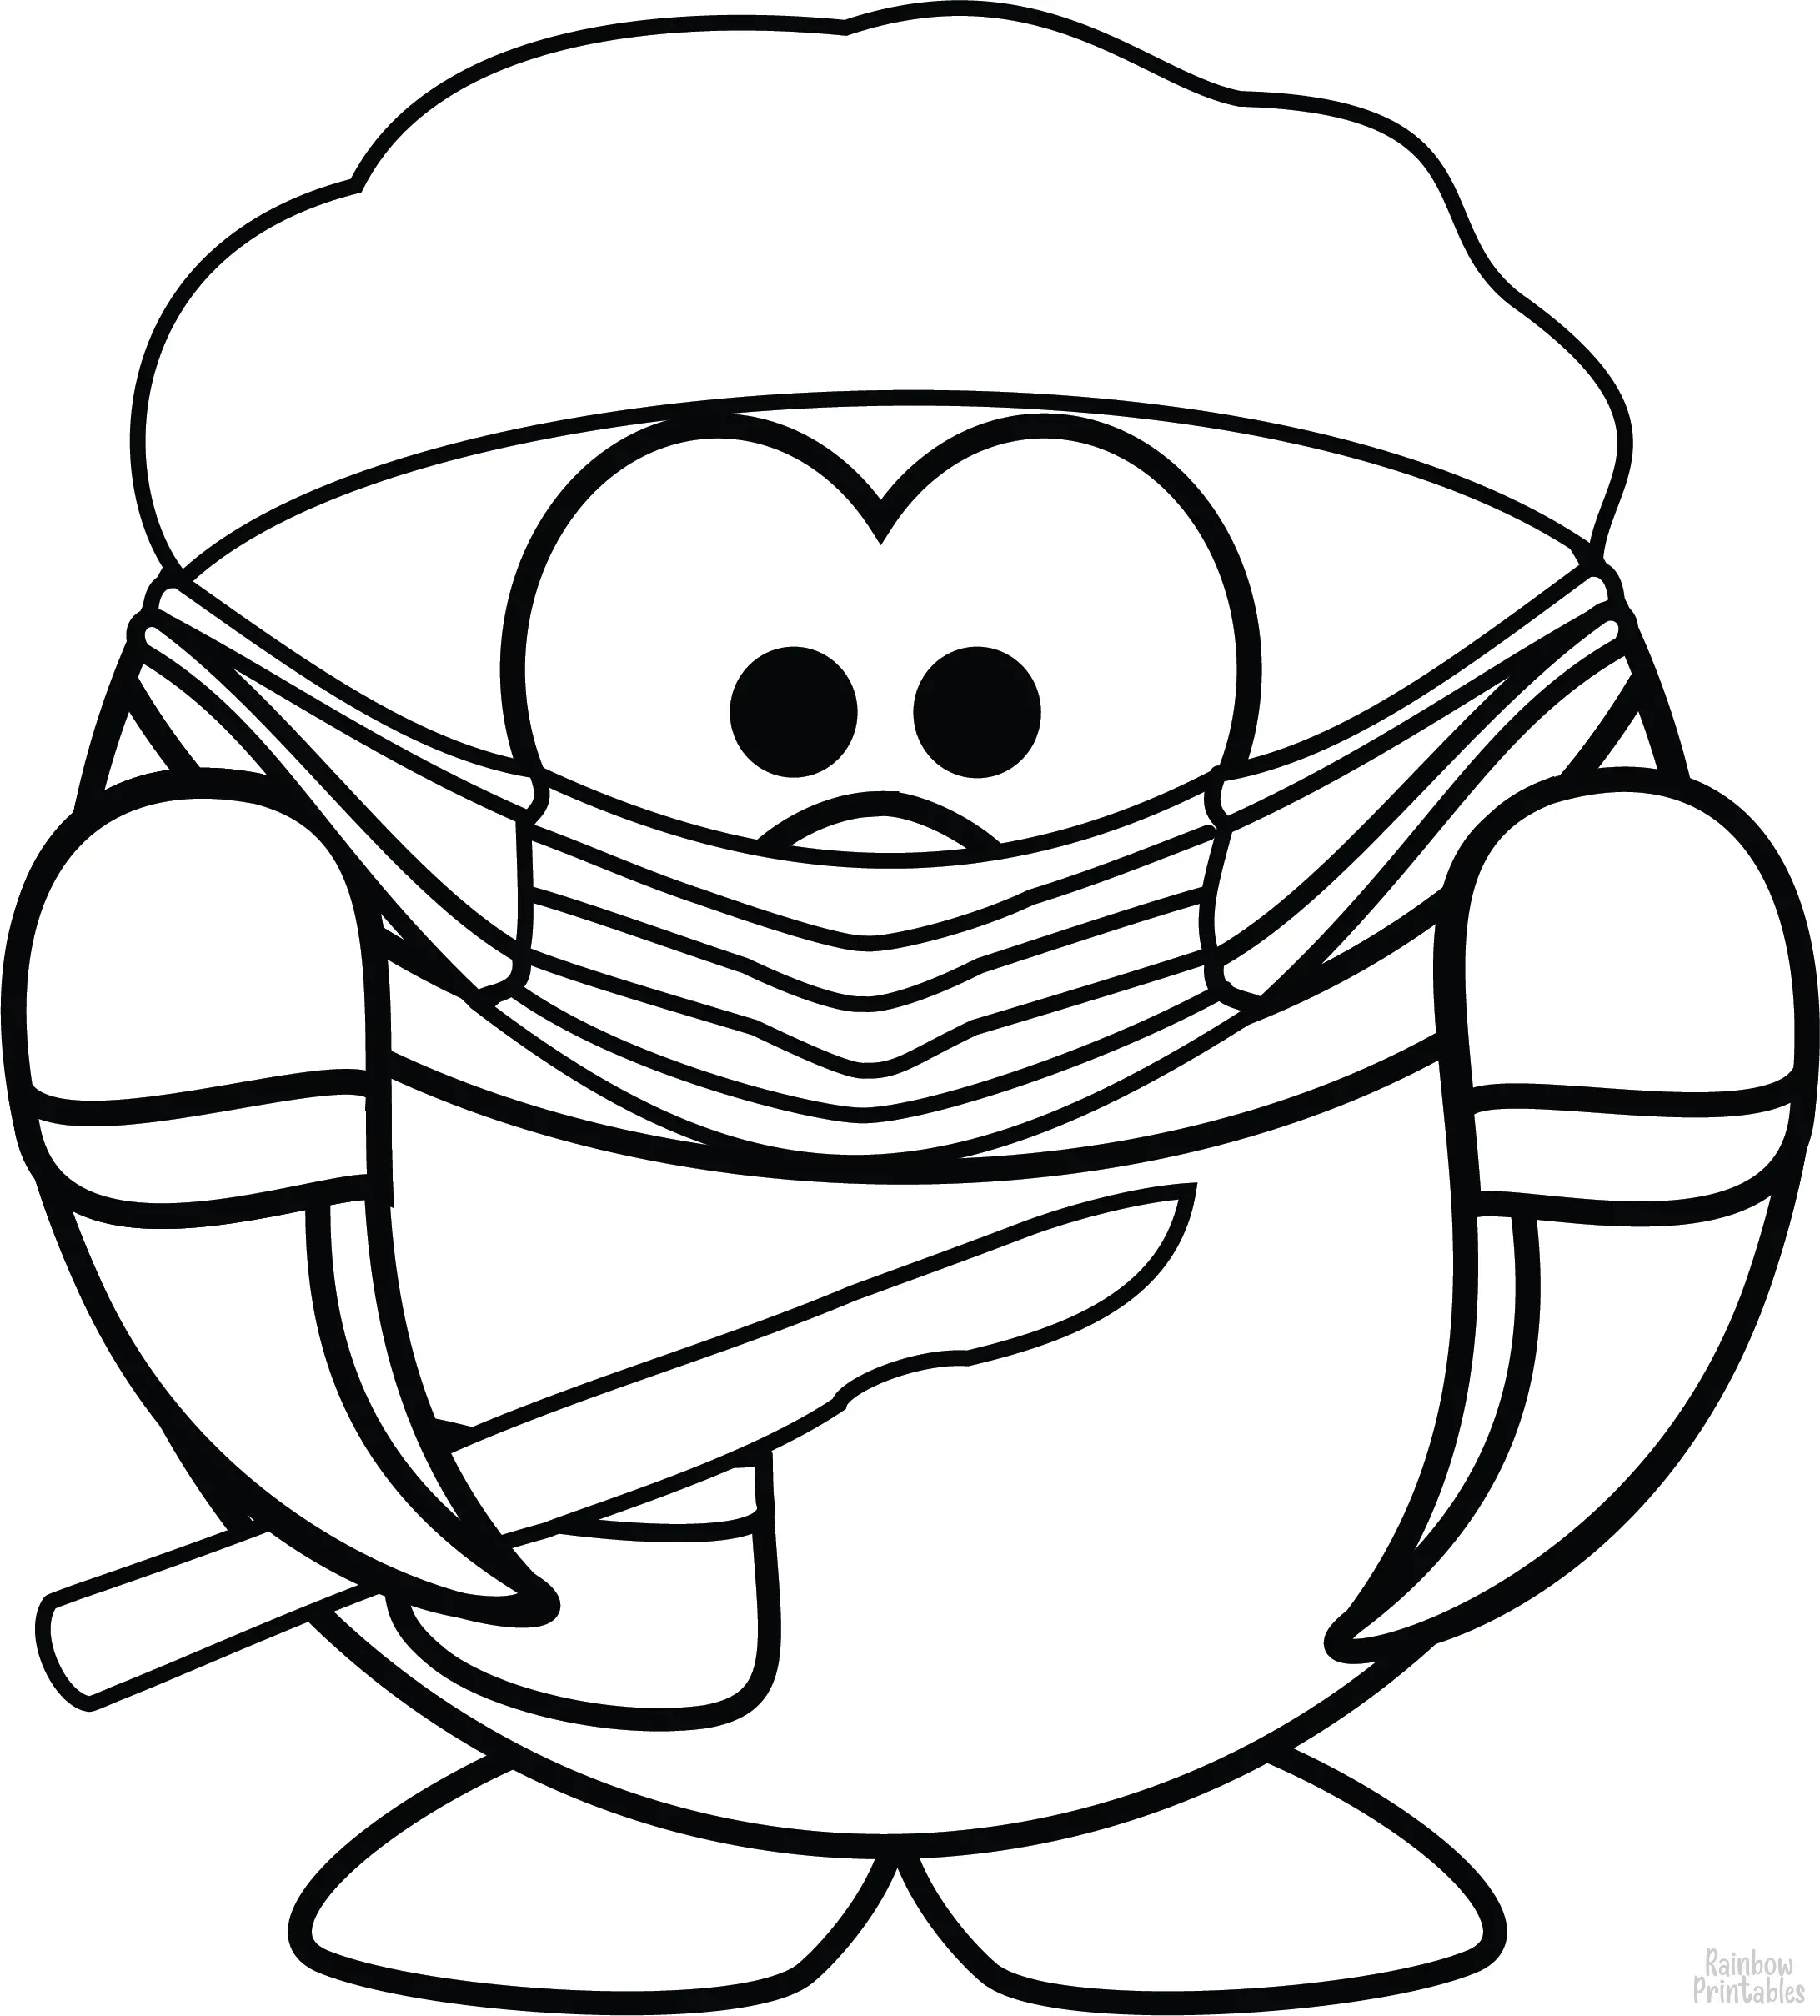 Doctor Penguin coloring-page Funny Cartoon Line Drawing Health Medical Activity For Kids Freebie